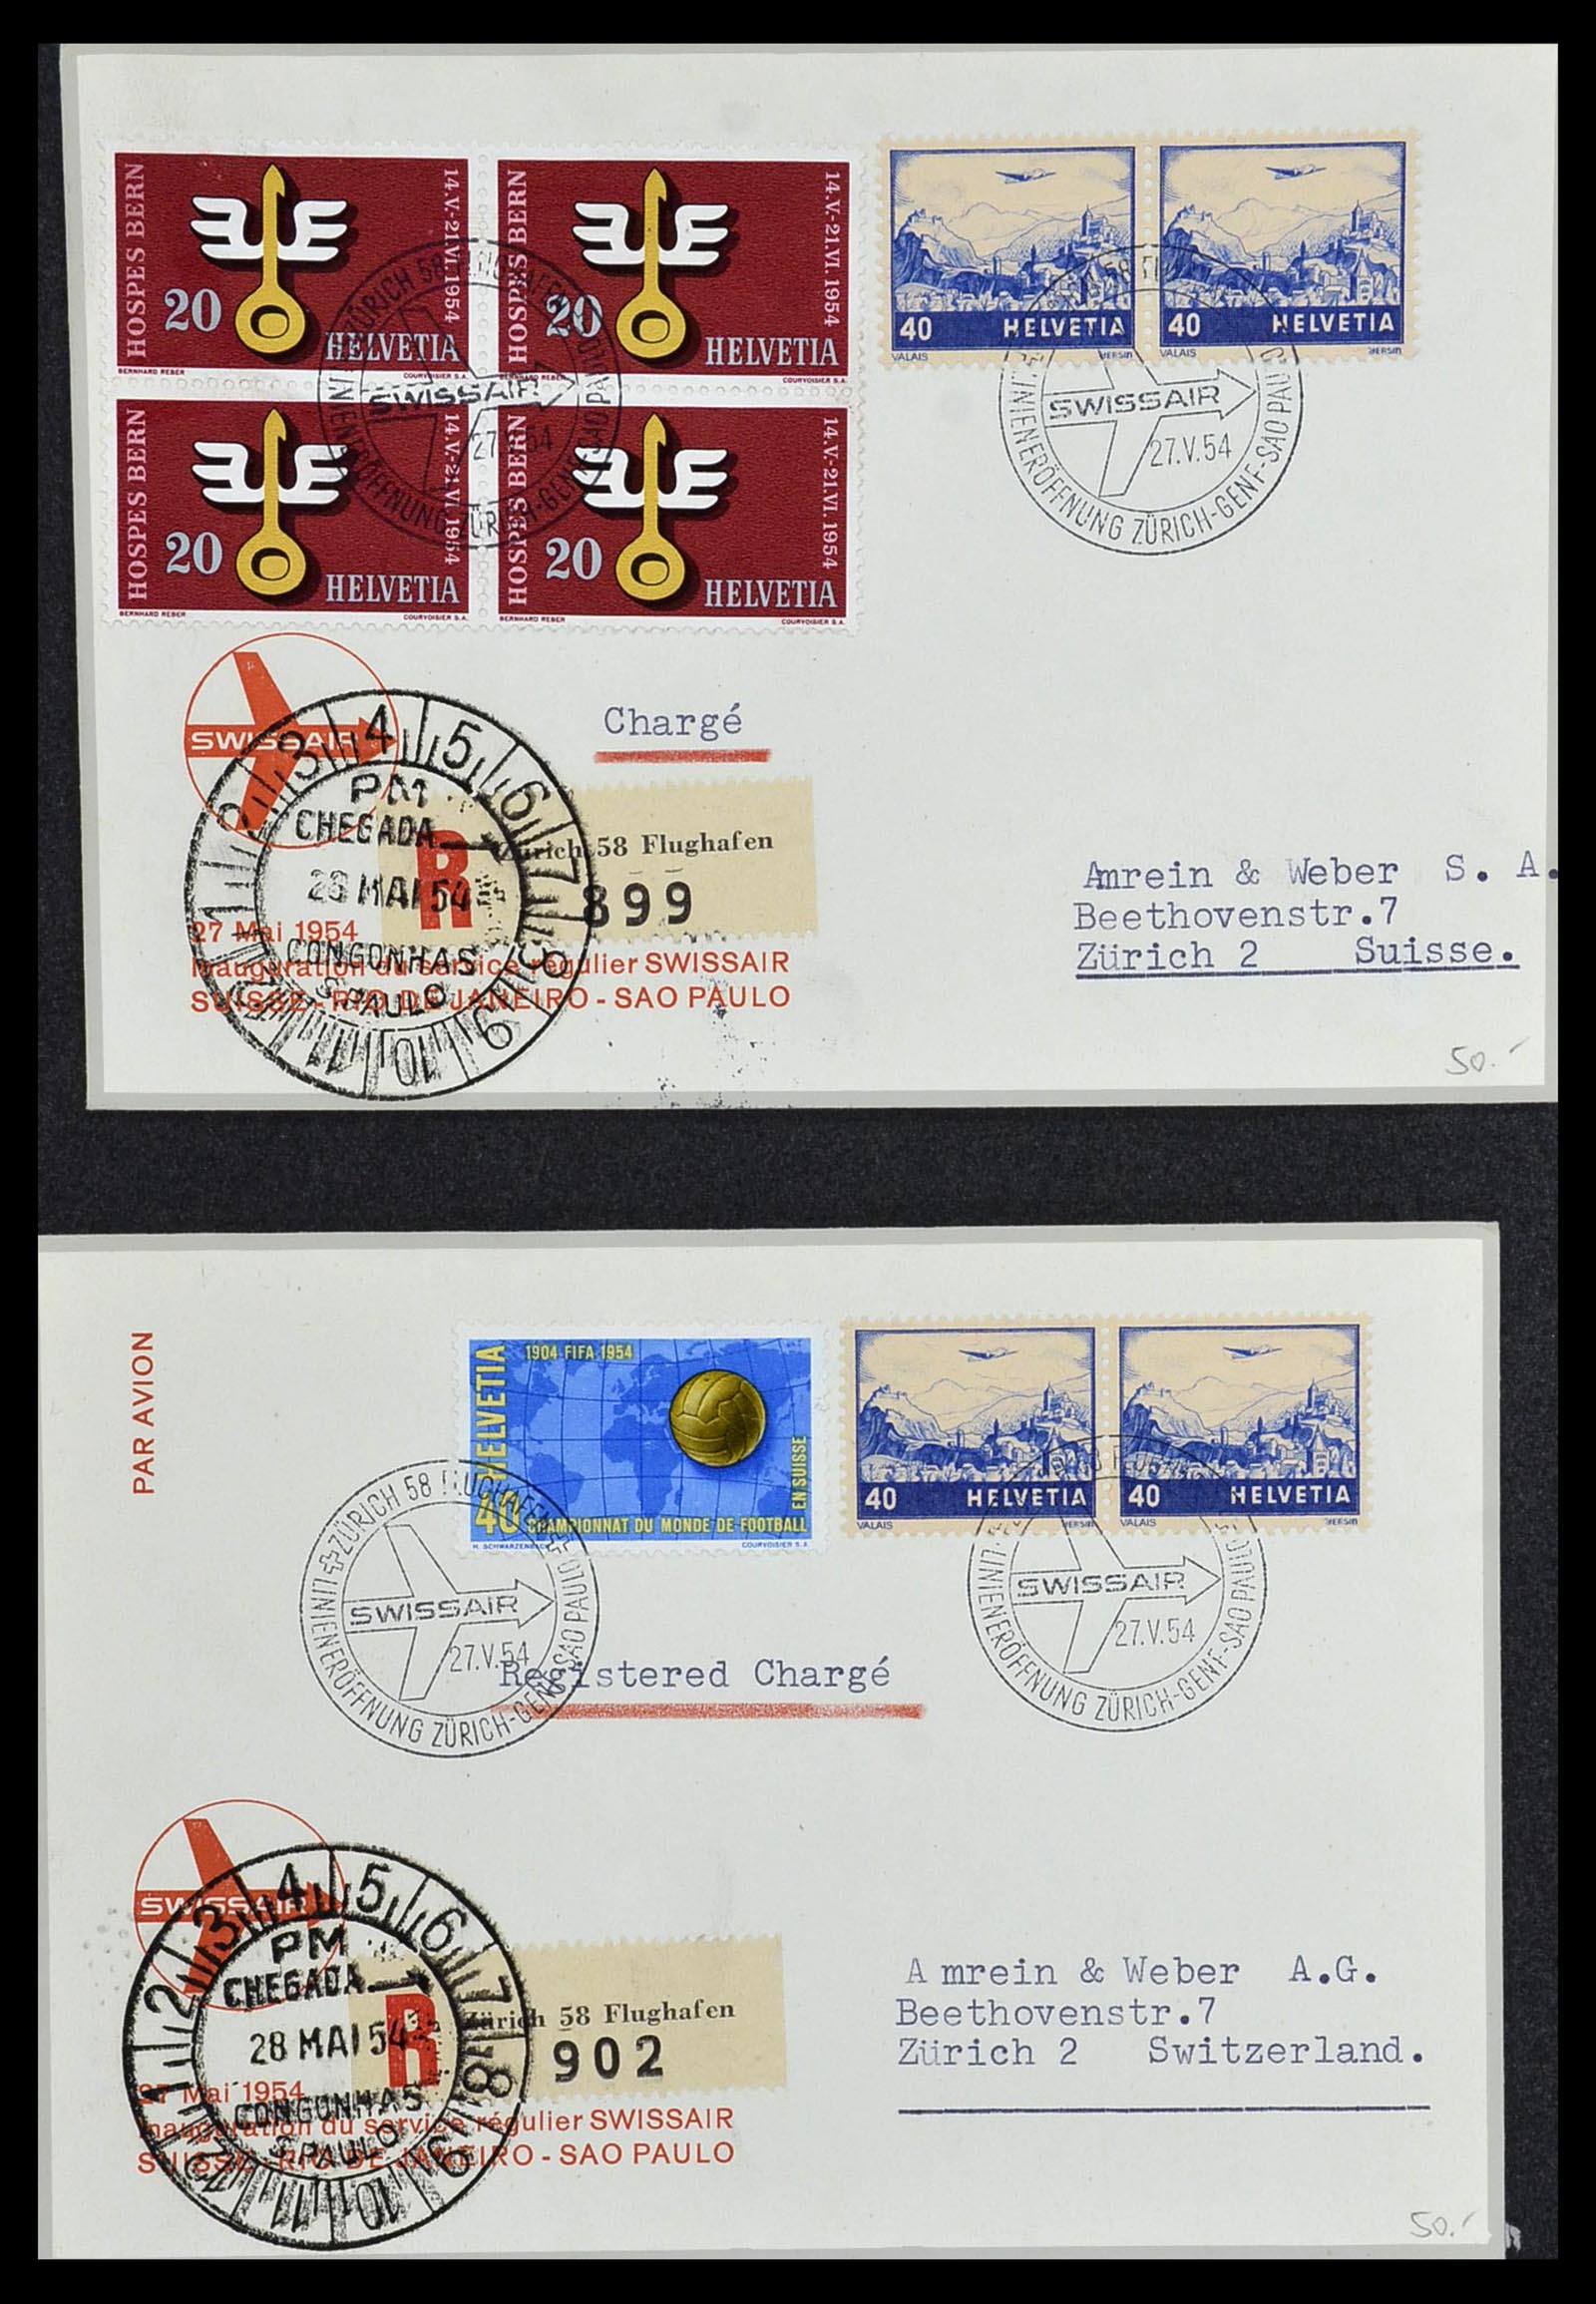 34141 090 - Stamp collection 34141 Switzerland airmail covers 1920-1960.